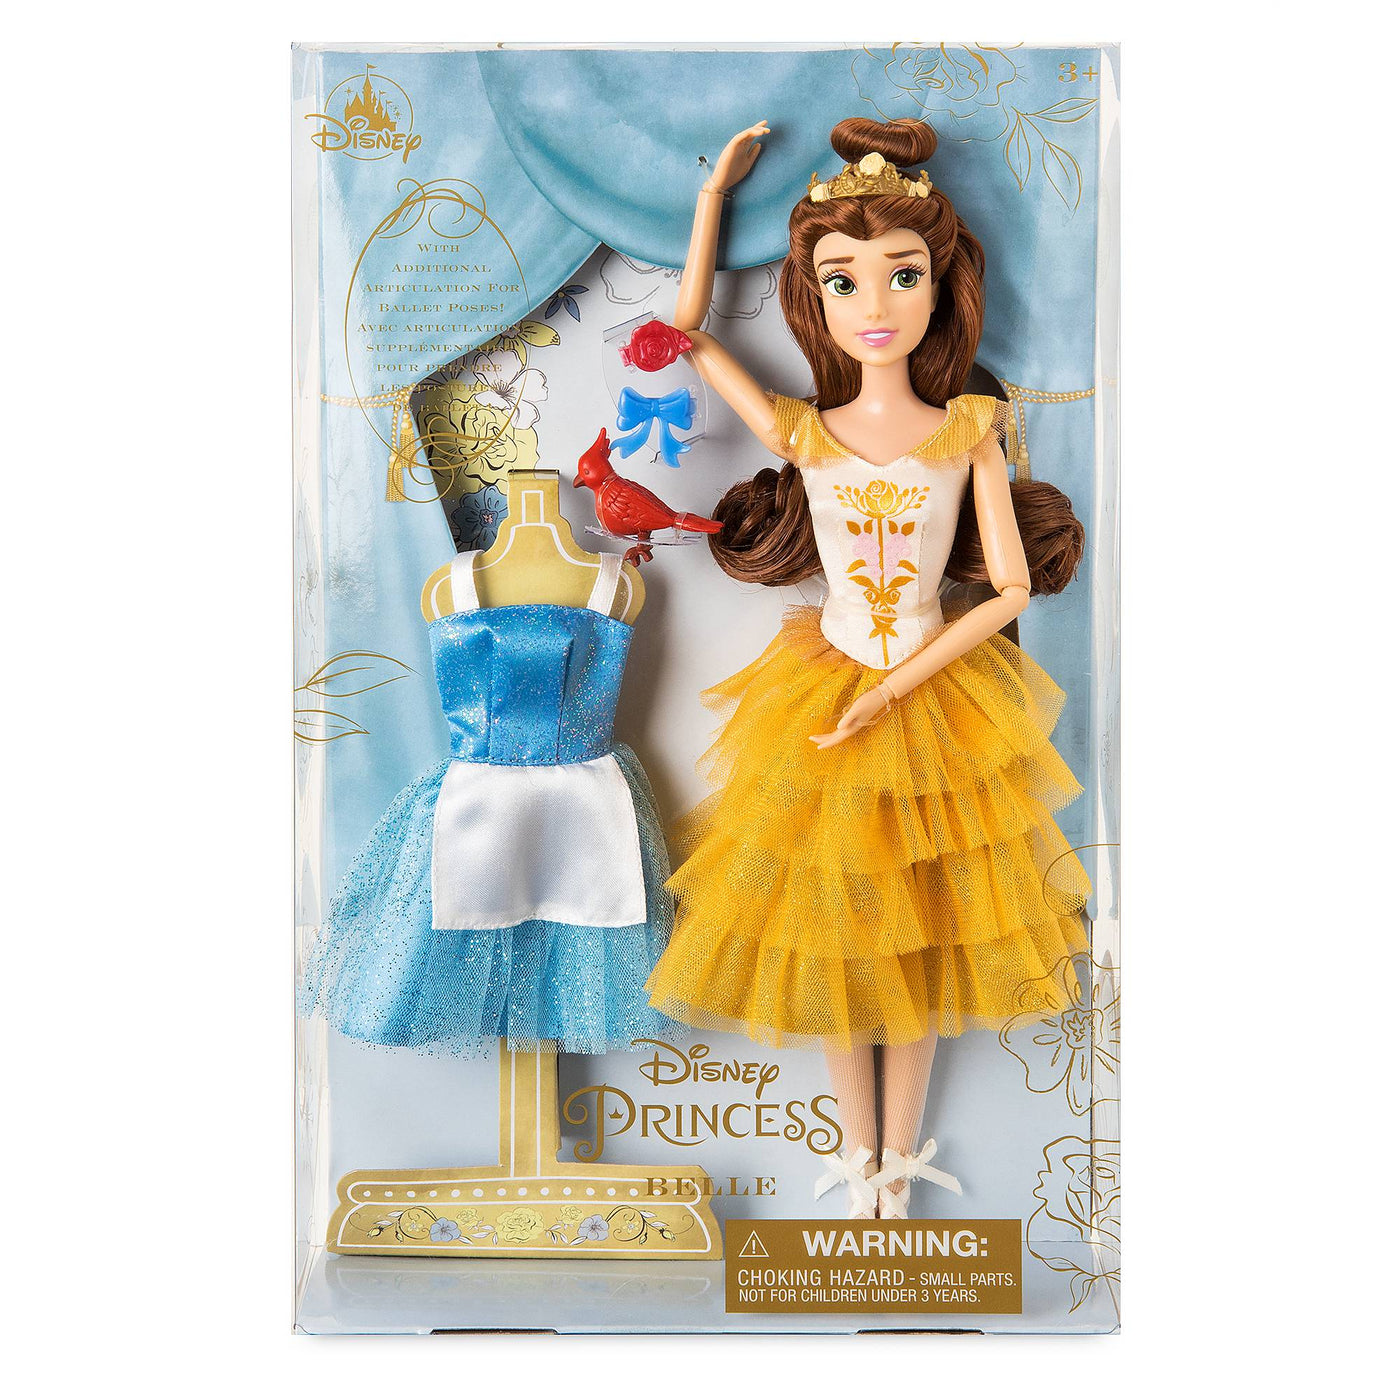 Disney Store Princess Belle Ballet Doll 11 1/2'' Beauty and the Beast New